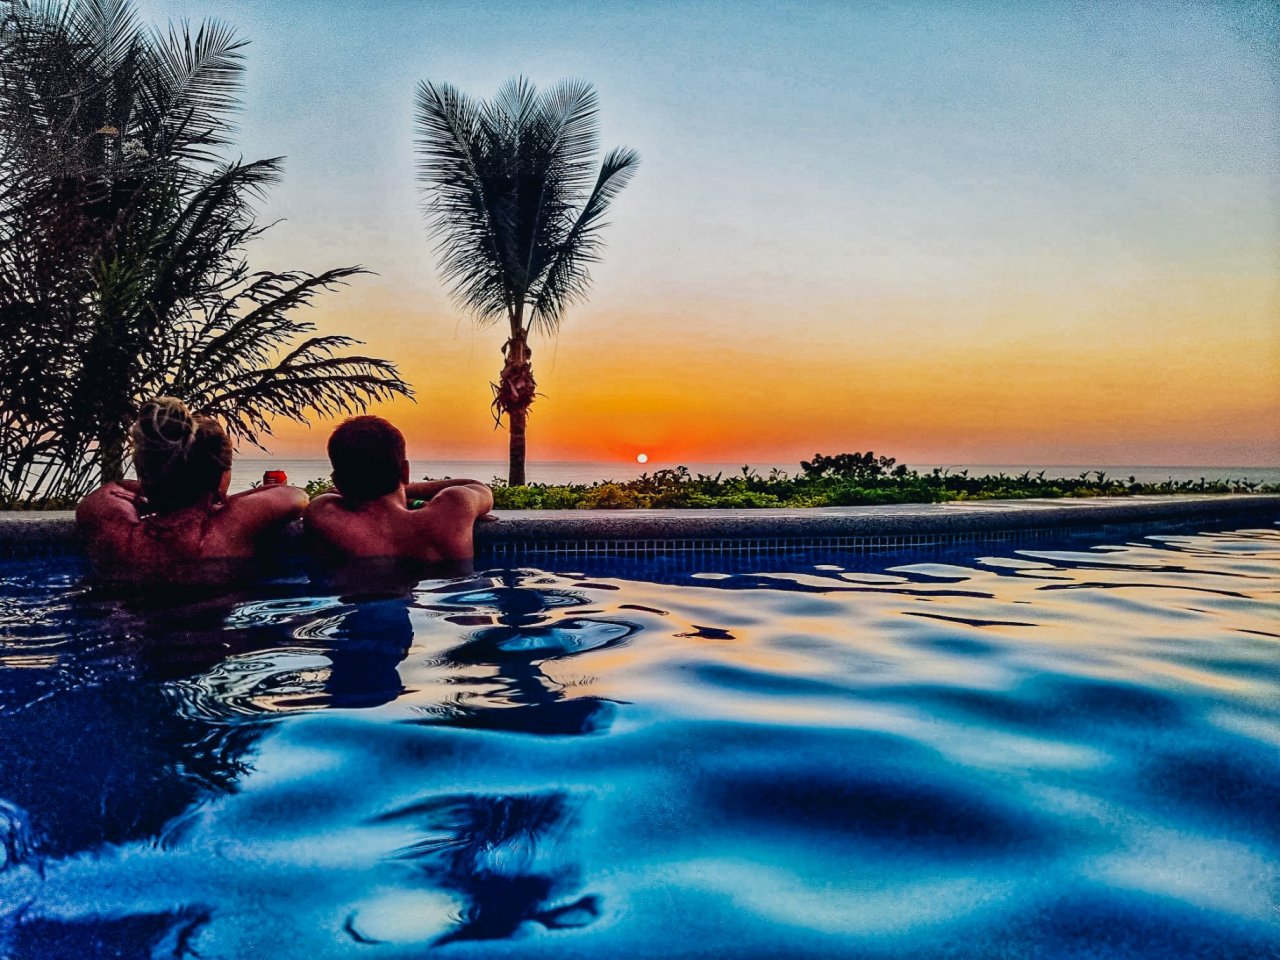 A couple watching the sunset in a pool overlooking the sea.